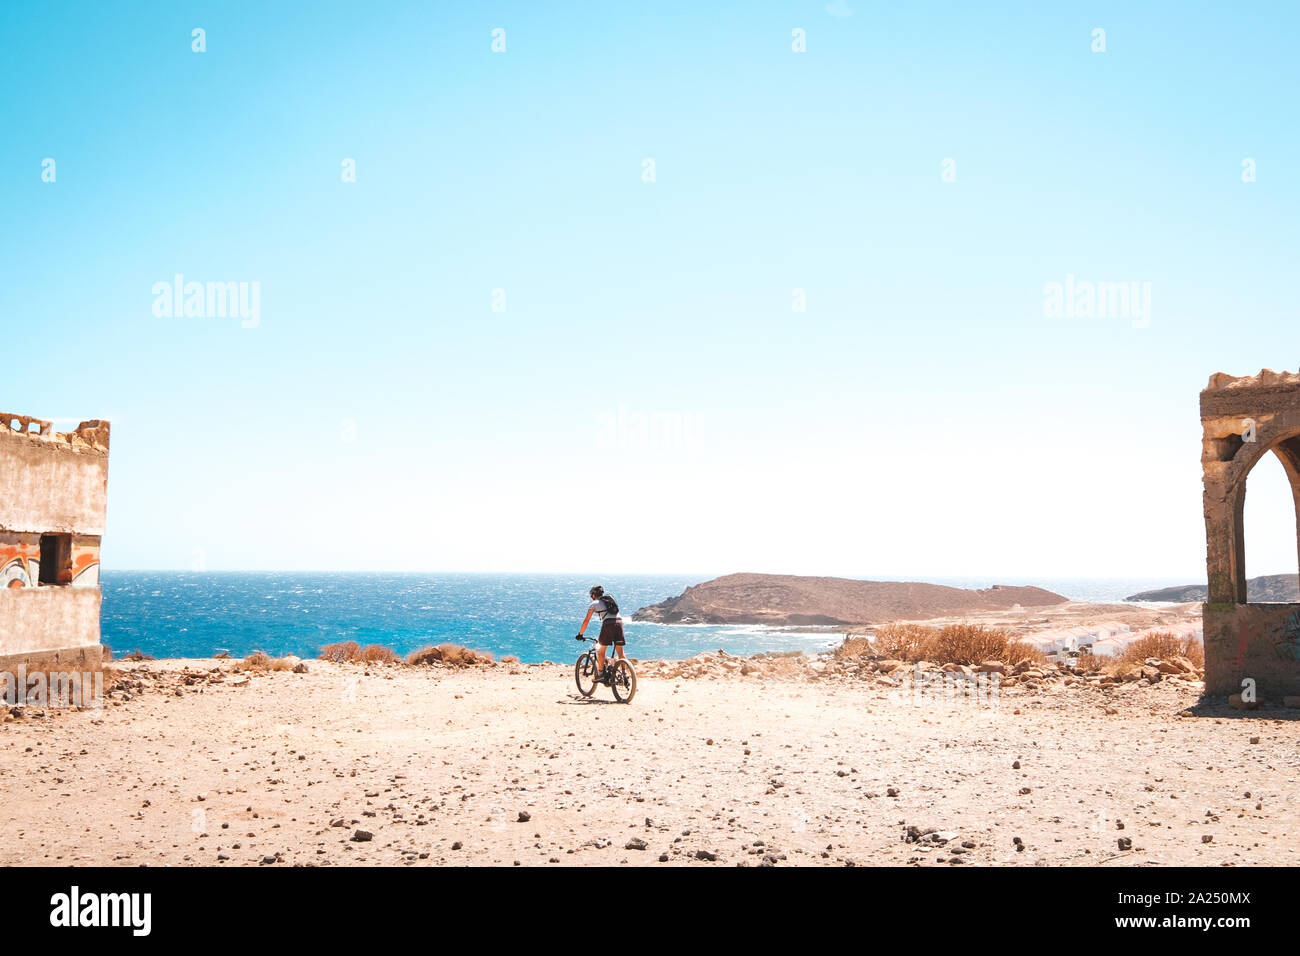 person on mountain bike bicycle in desert landscape near coast with ocean background Stock Photo